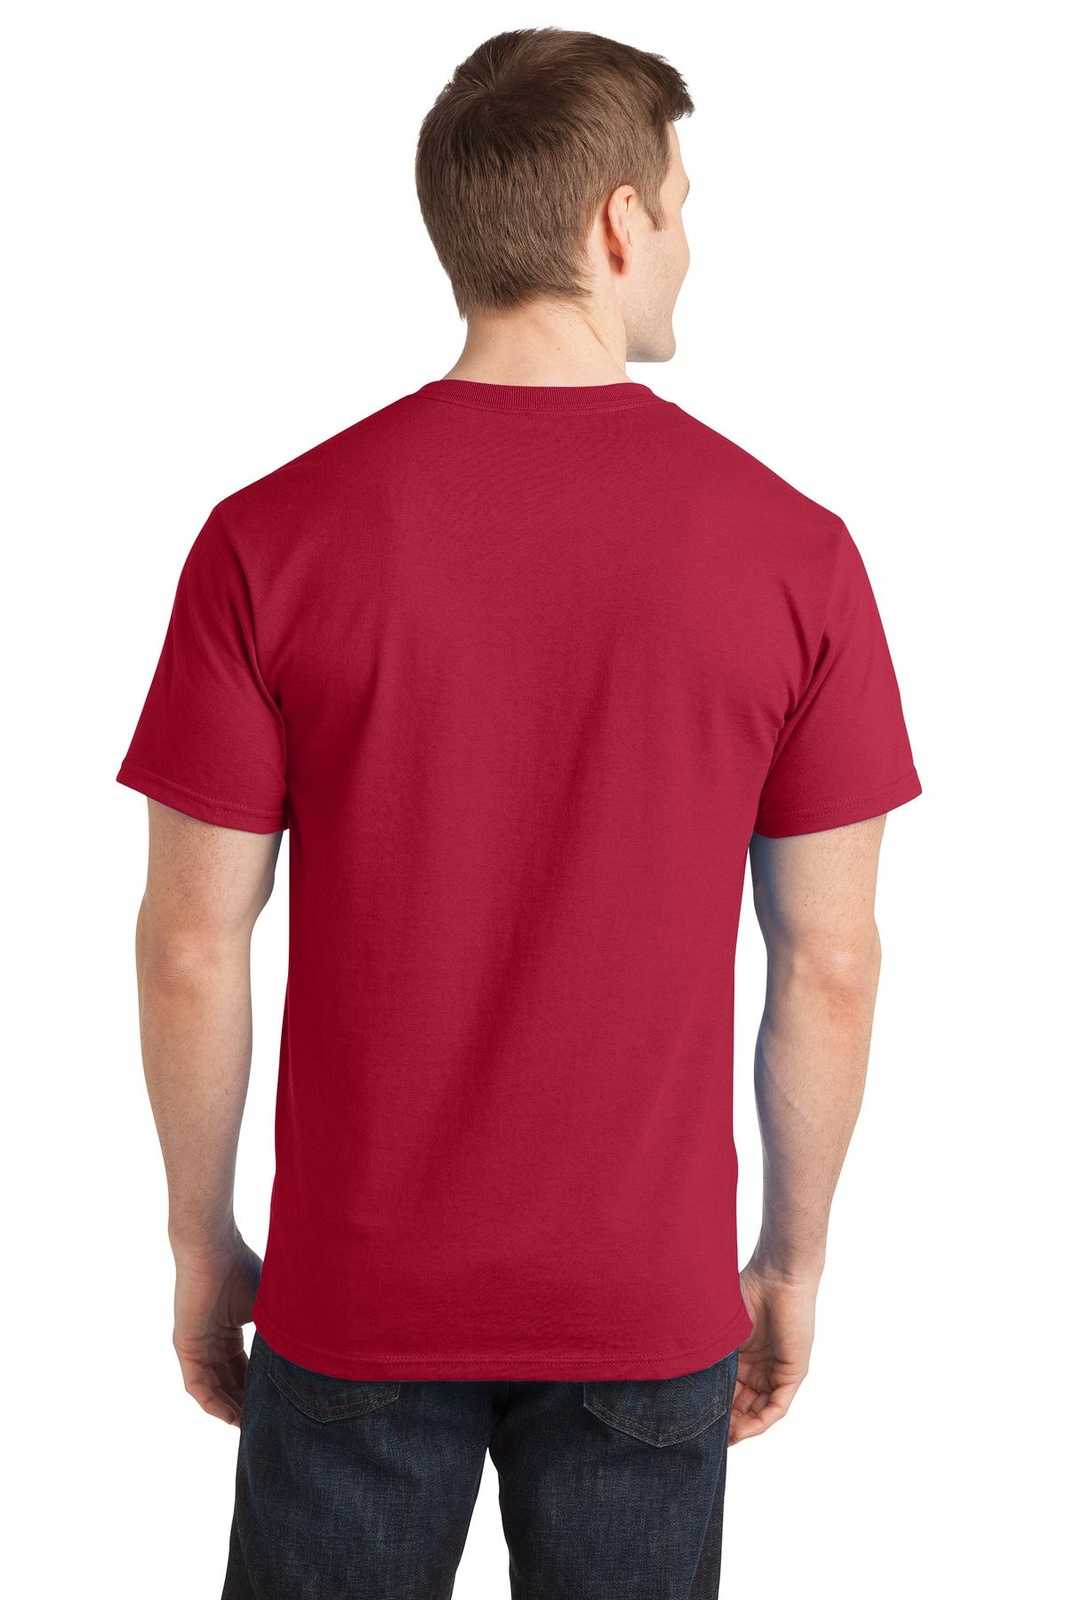 Port &amp; Company PC150 Ring Spun Cotton Tee - Red - HIT a Double - 2